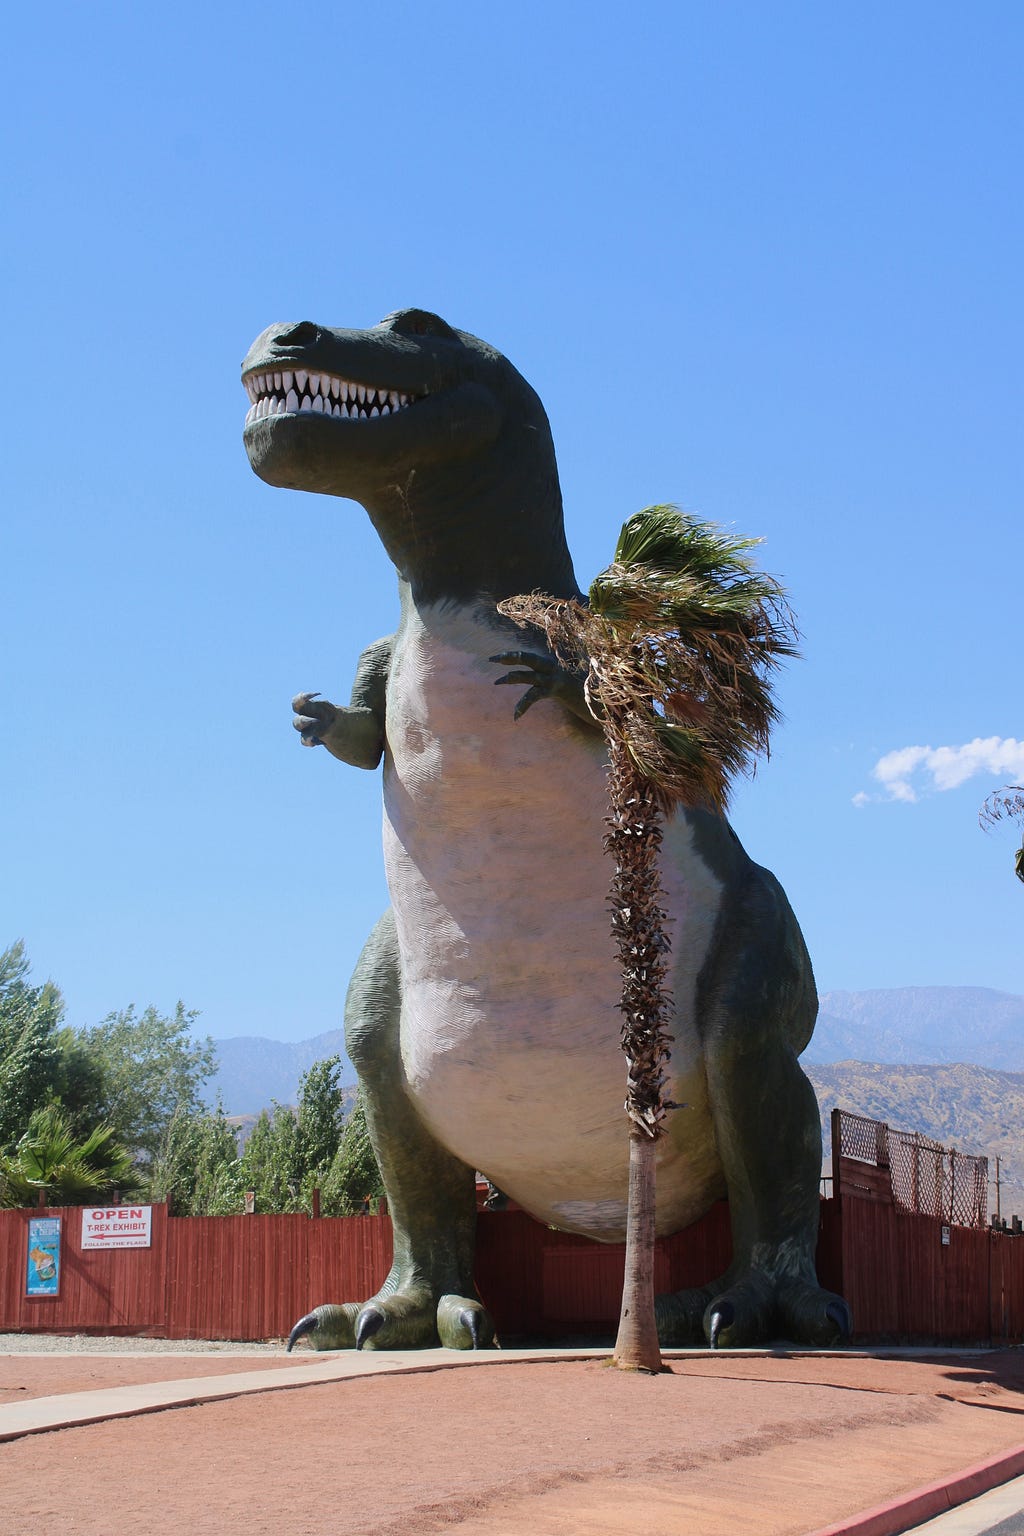 Interstate-10 giant Tyrannosaurus rex with palm tree for scale